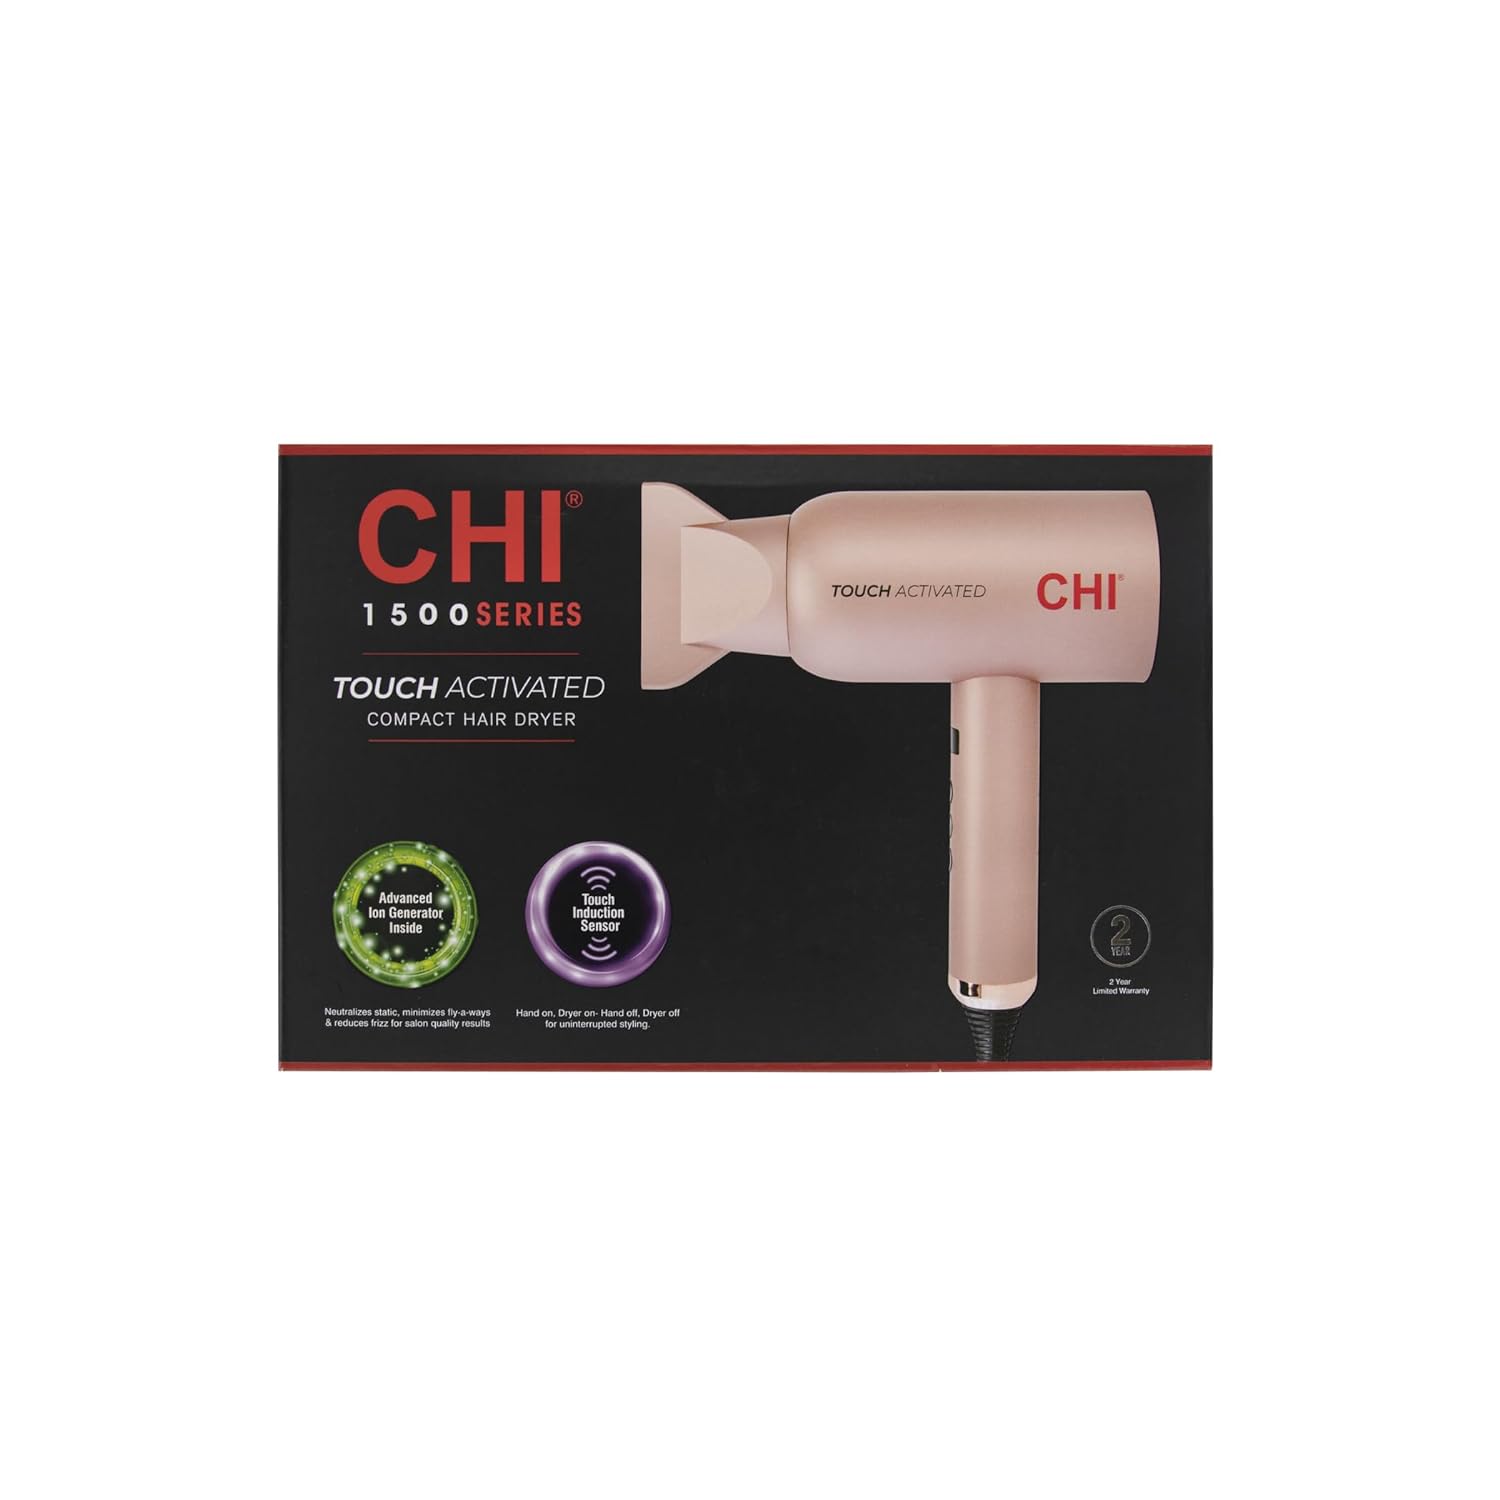 CHI Touch Activated Compact Hair Dryer with Optional Touch Sensor for Uninterrupted Styling : Beauty & Personal Care